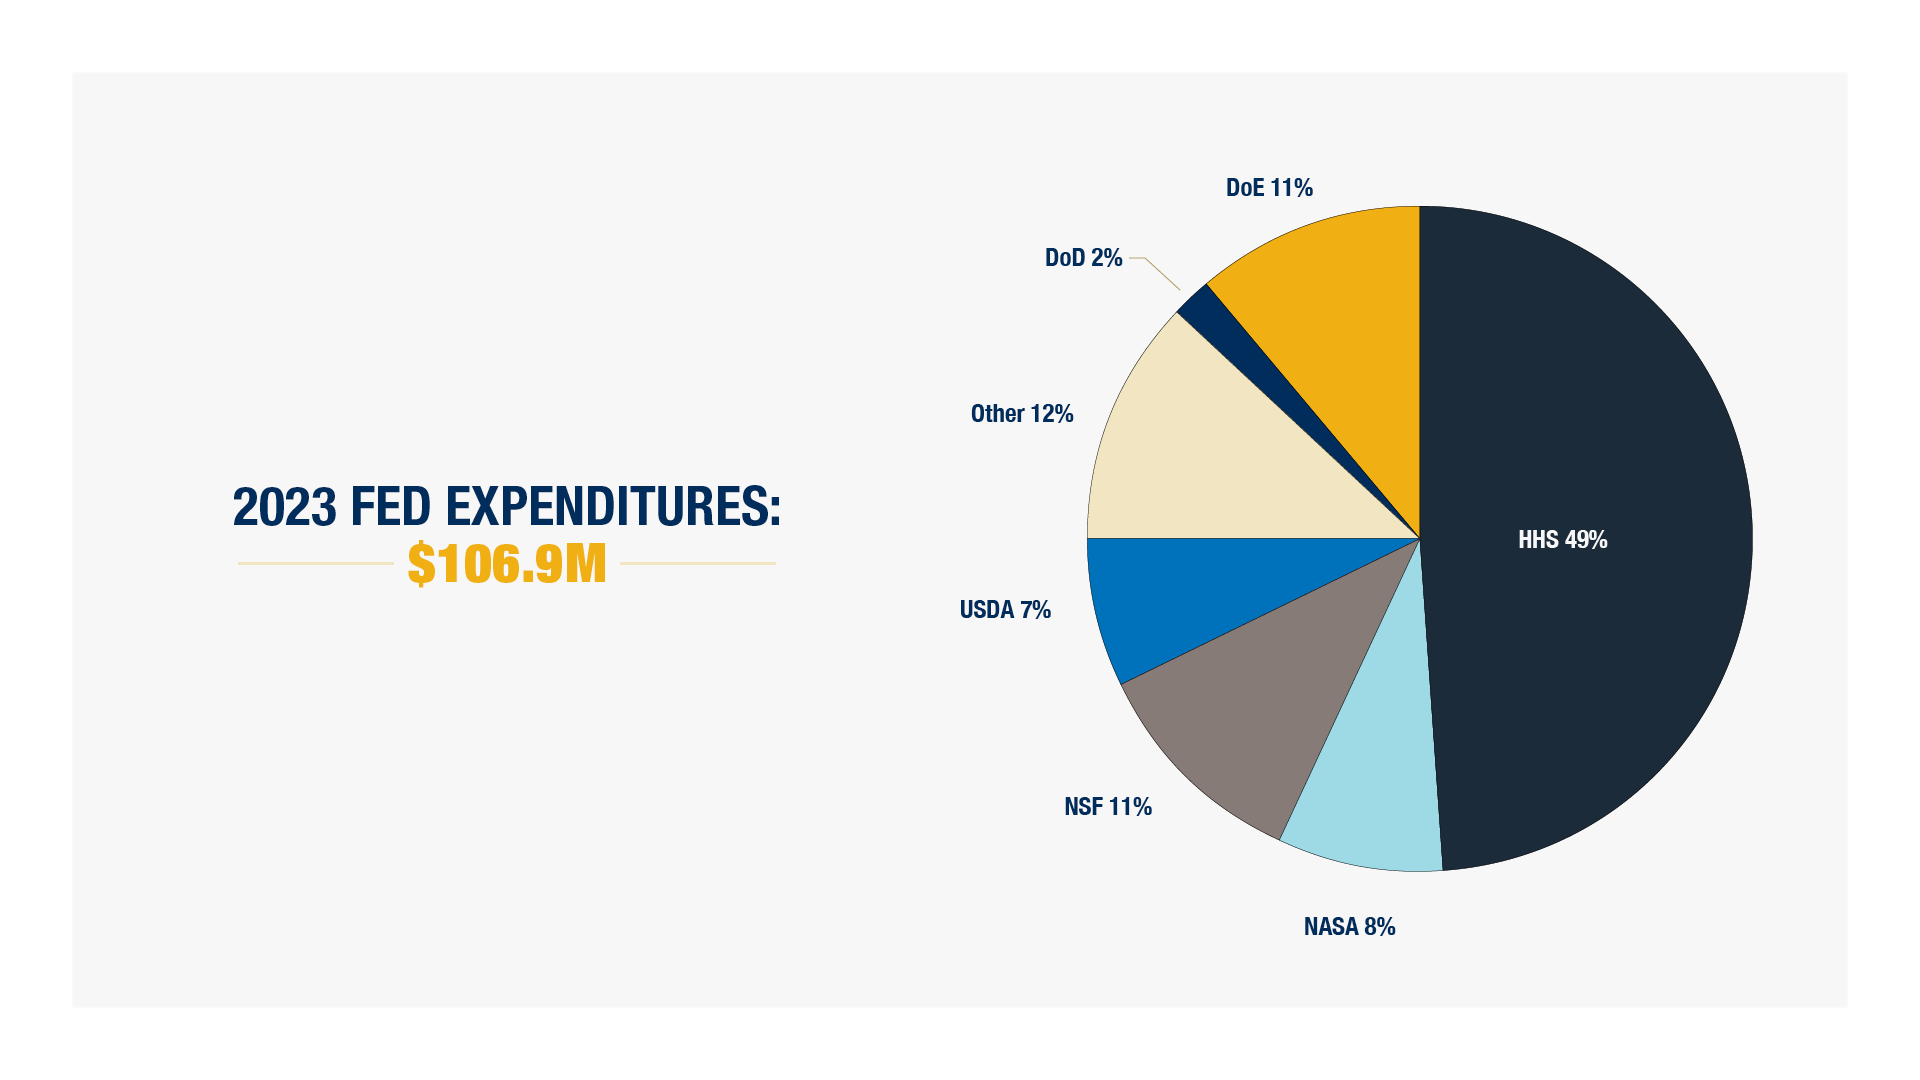 2023 Federal Expenditures